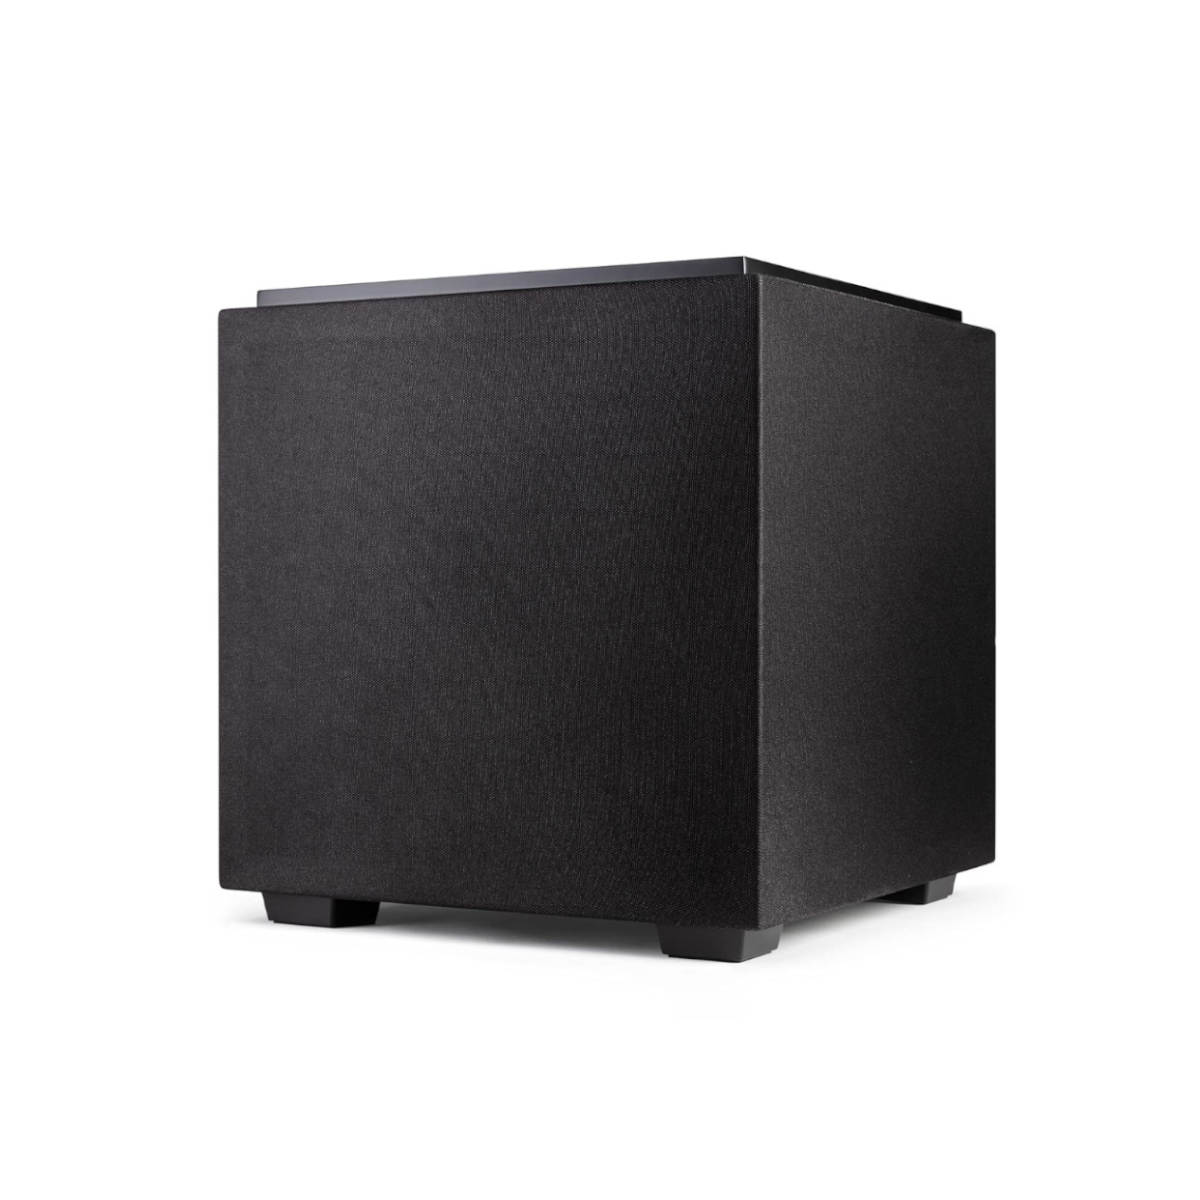 Definitive Technology Descend Series DN10 10” Subwoofer (Midnight Black) - Ooberpad India